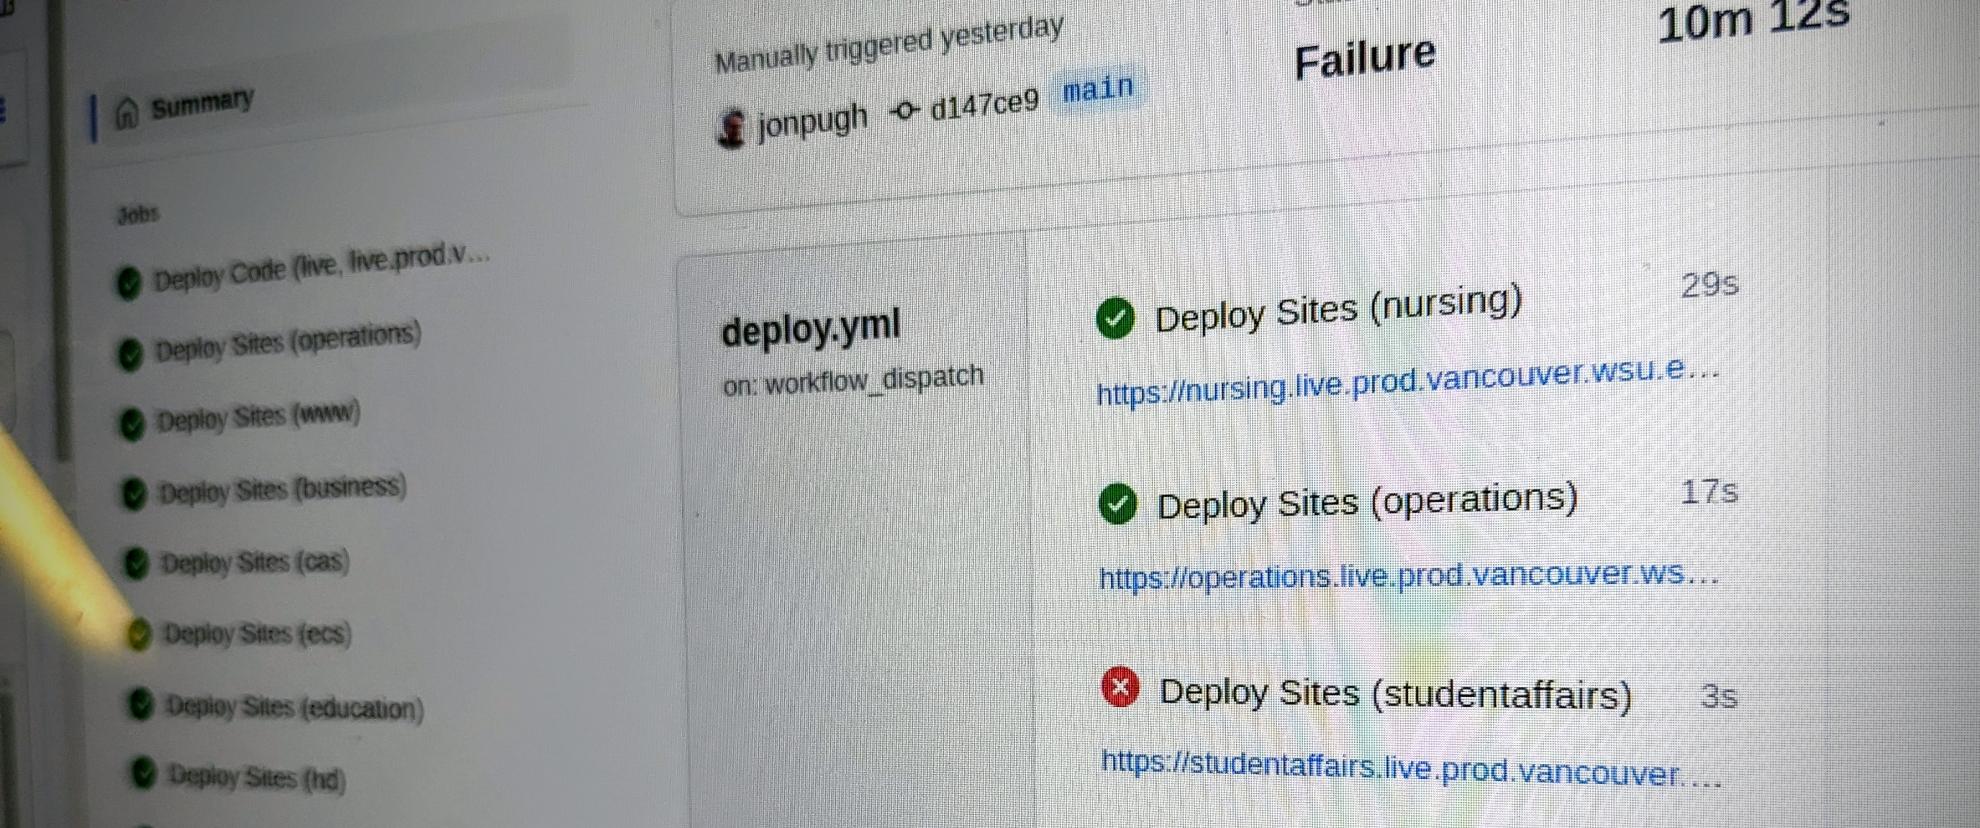 A deploy job that (mostly) worked.